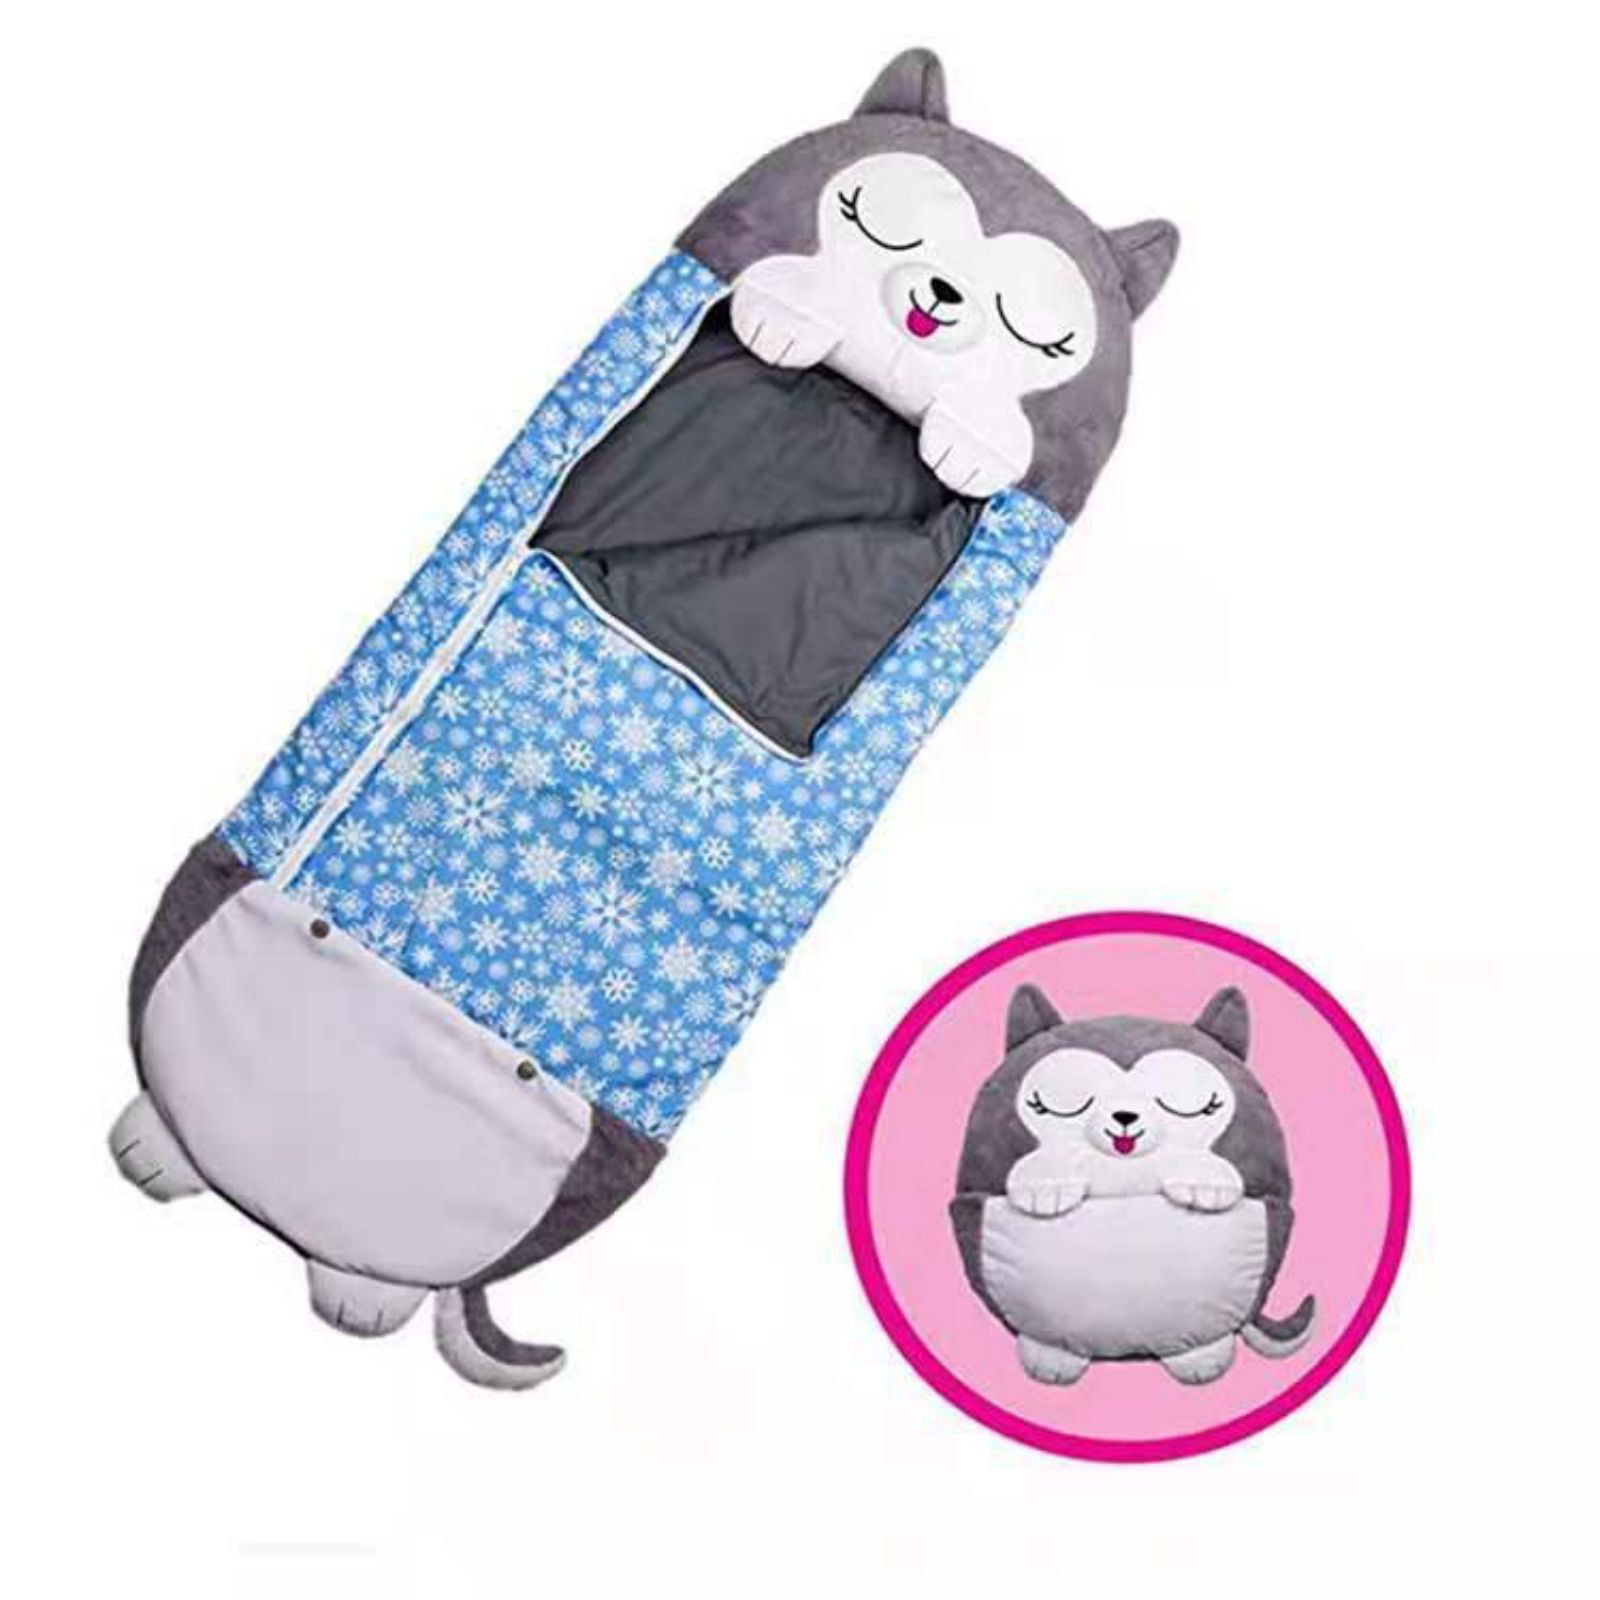 2in1 Happy NappersPlay Pillow & Sleep Sack Surprise 54" Tall x 20" Wide 2-8 a 